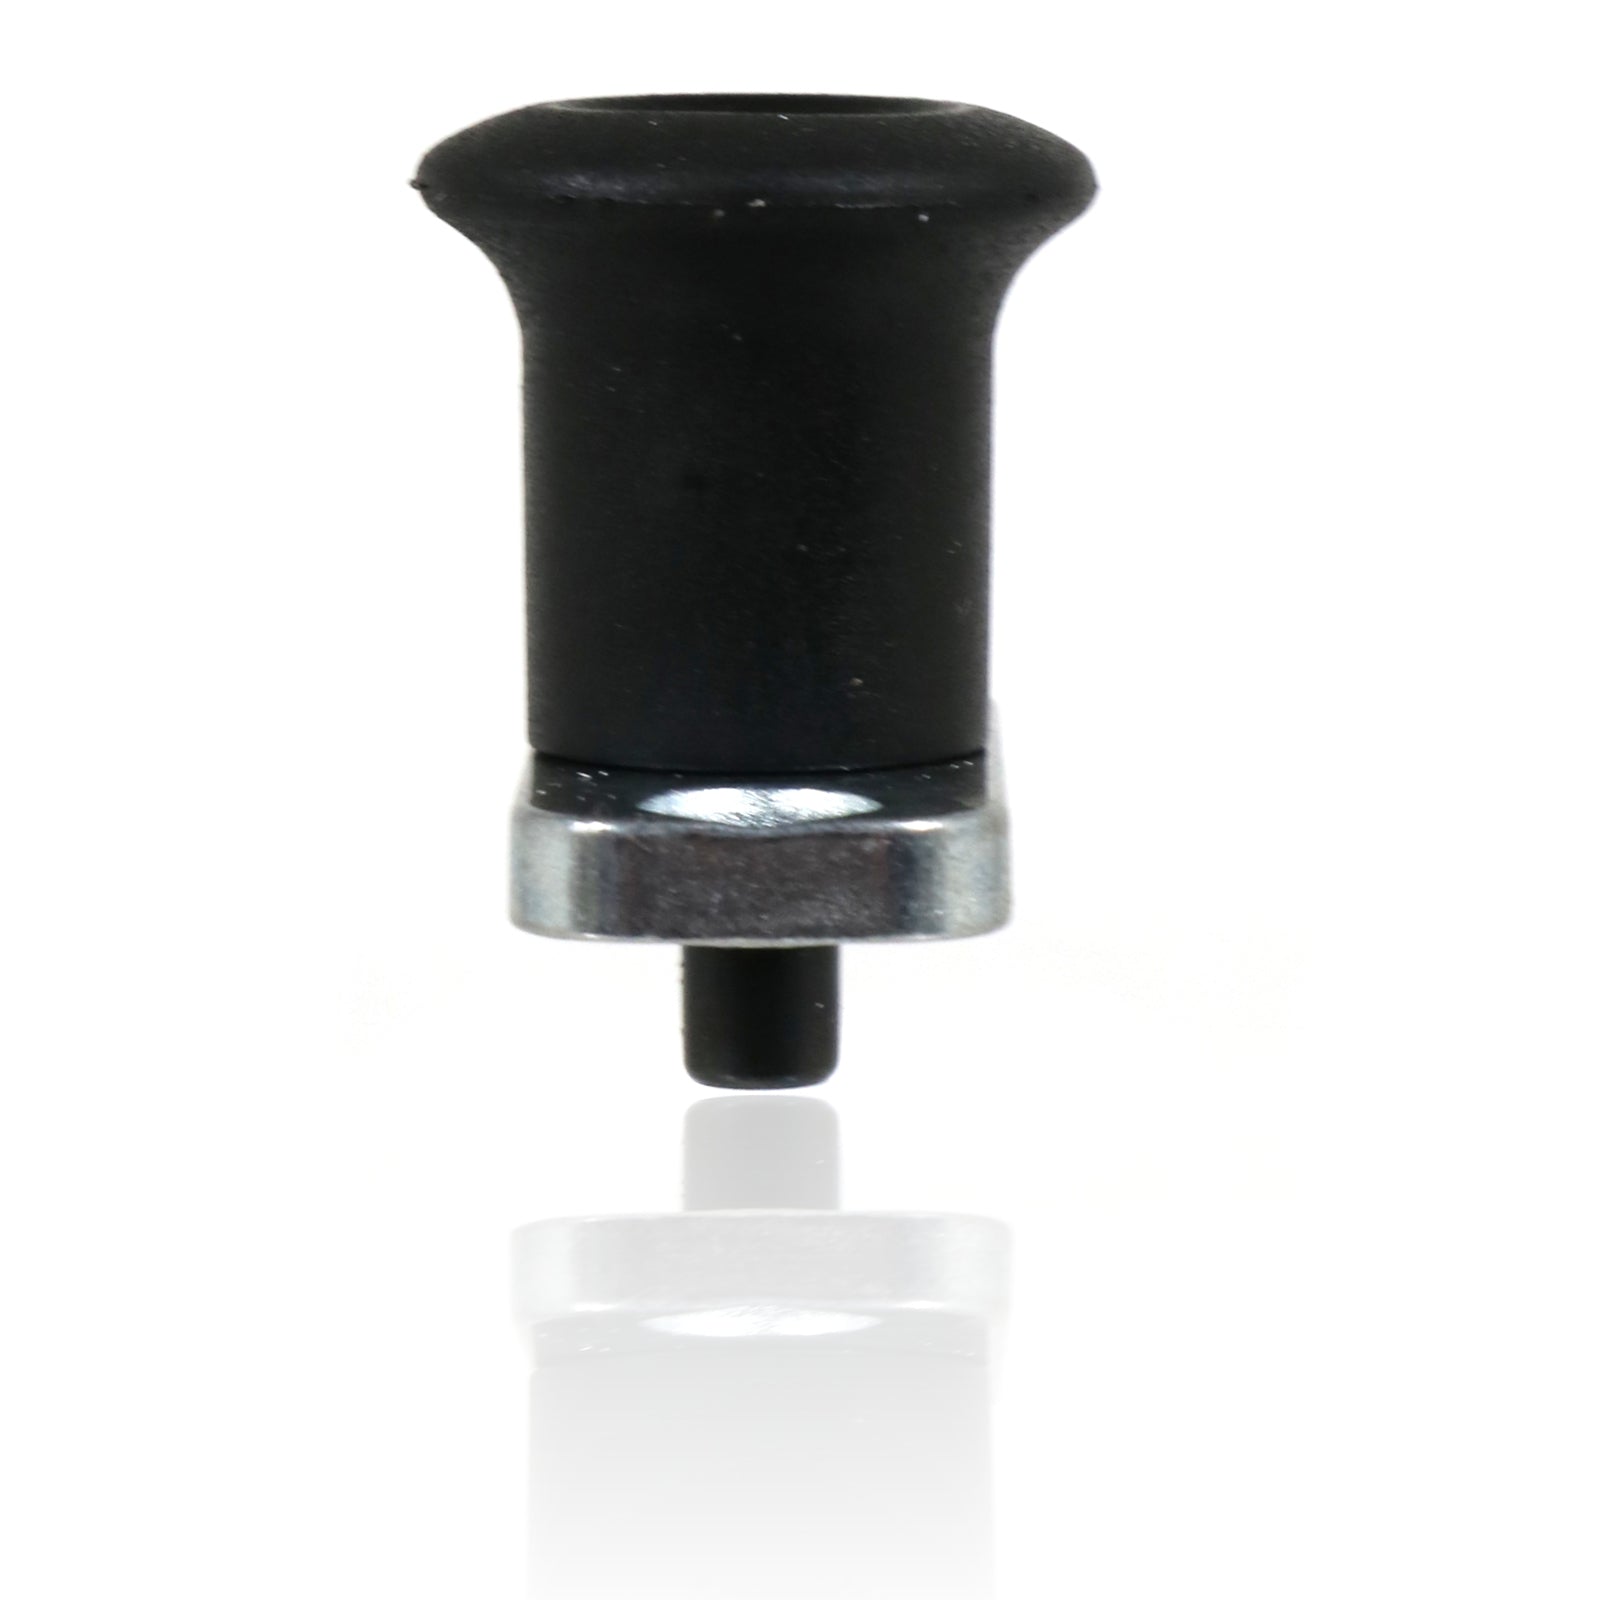 6mm Index Plunger with Fixing Flange Plate and Rest Position Zinc Plated Steel